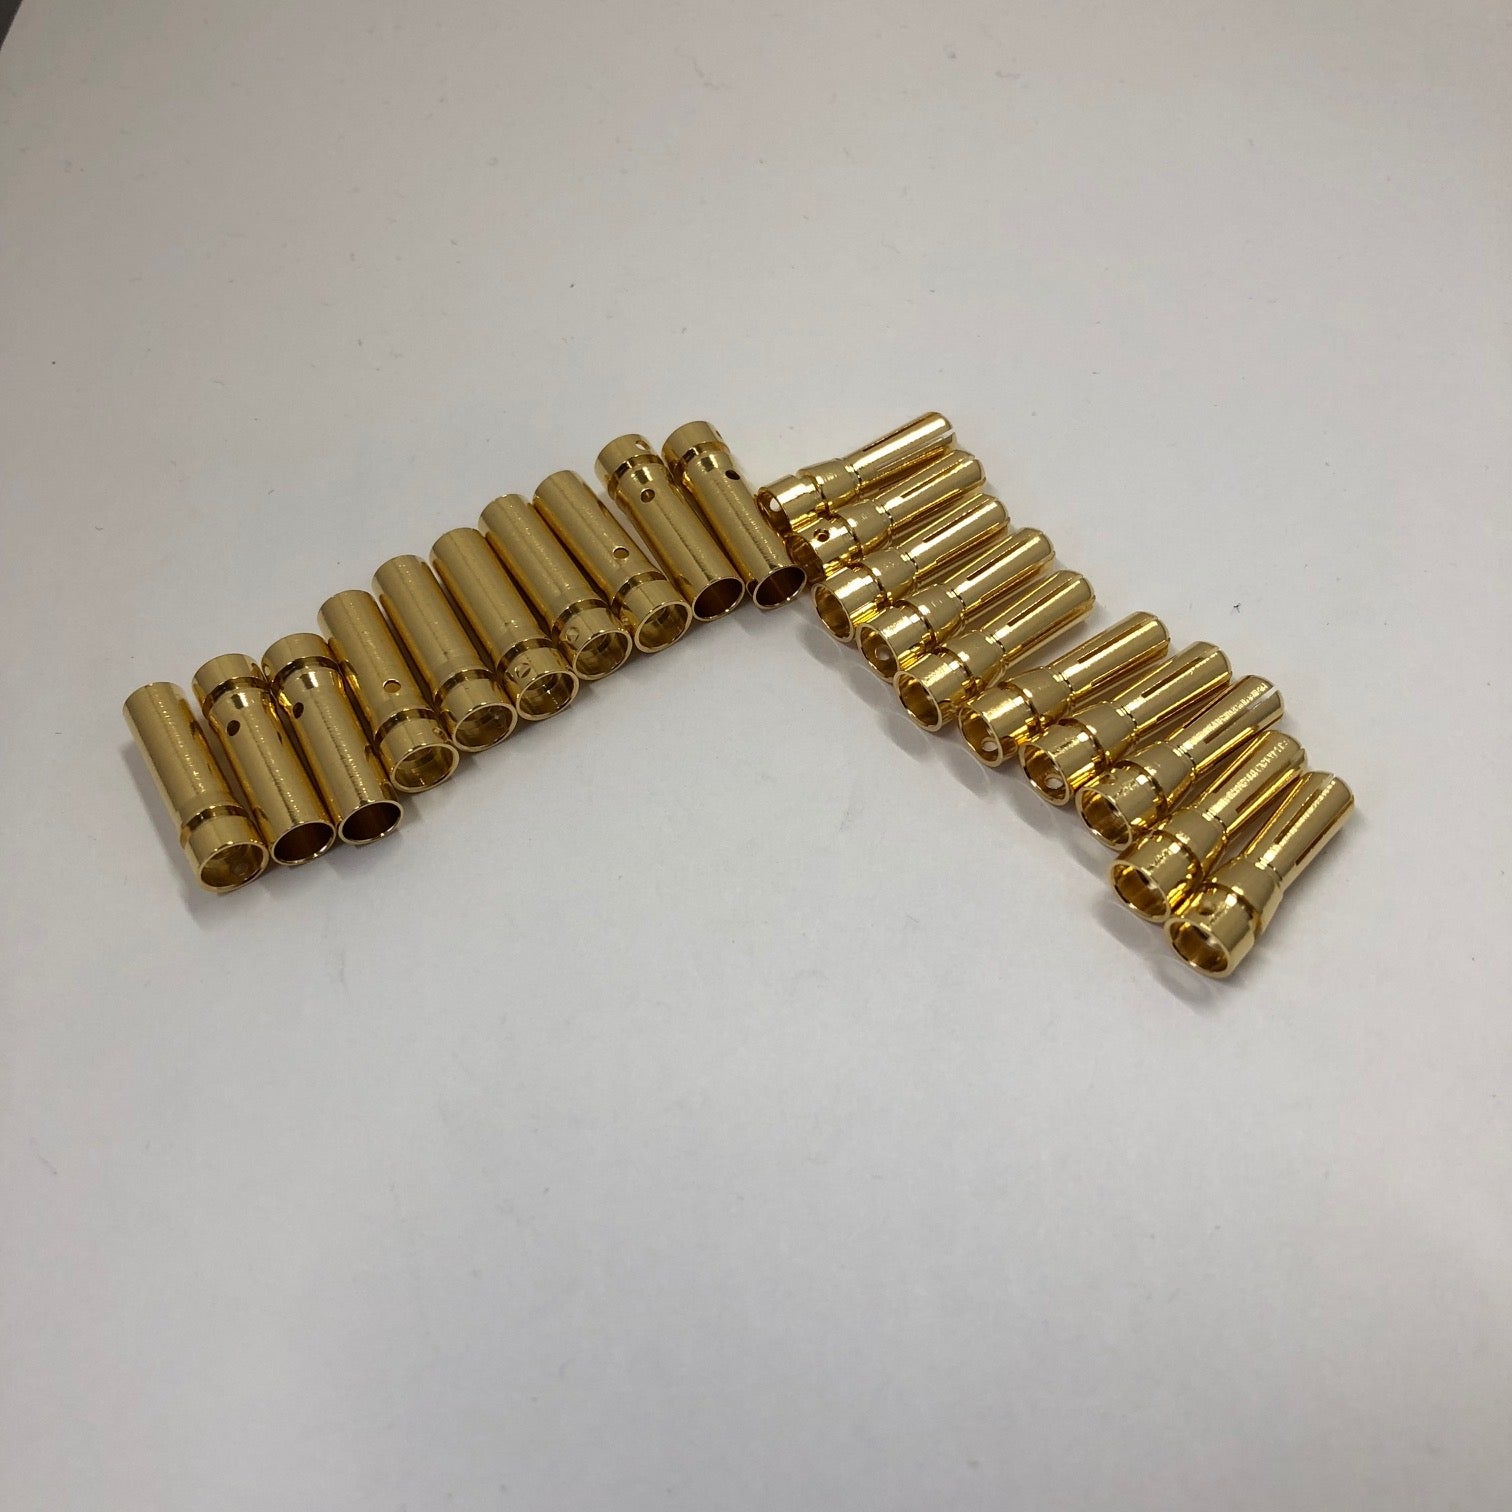 5mm Gold Bullet Connector Set - 10 Pairs